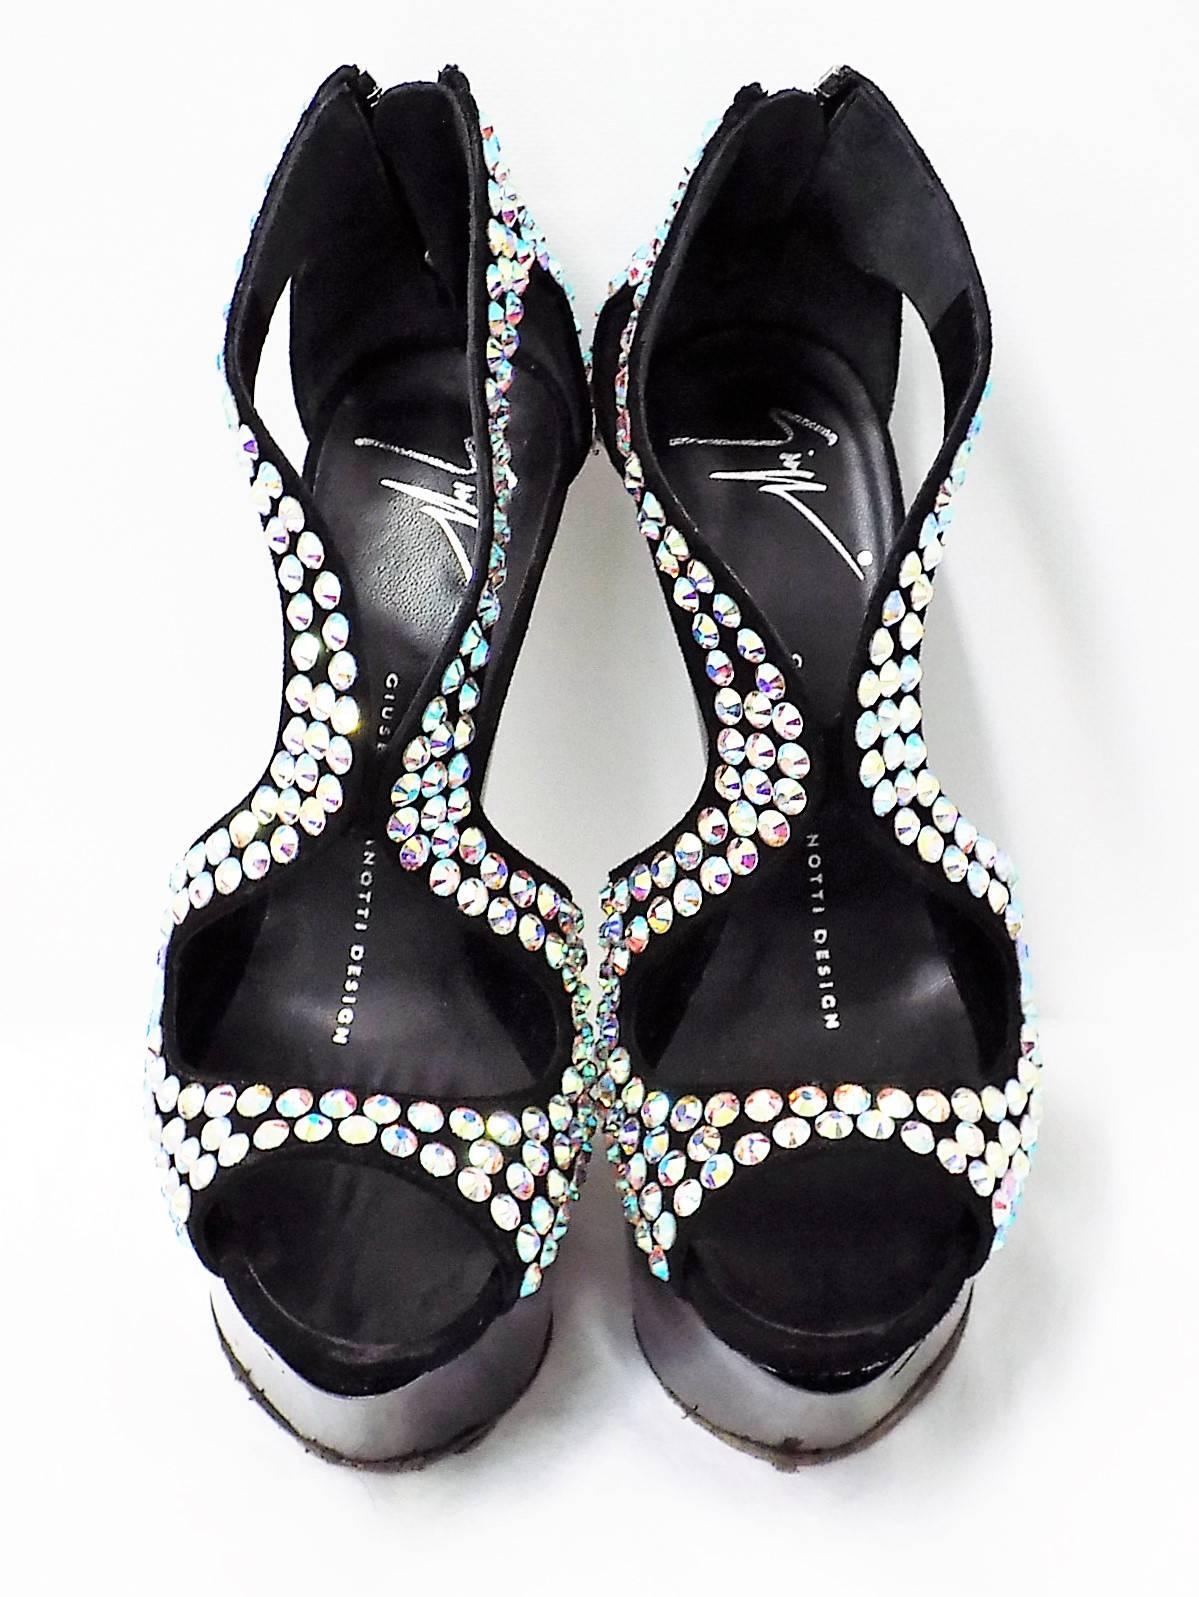 Women's Giuseppe Zanotti Limited Edition  Lucite platform wedges w/h large crystals Shoe For Sale